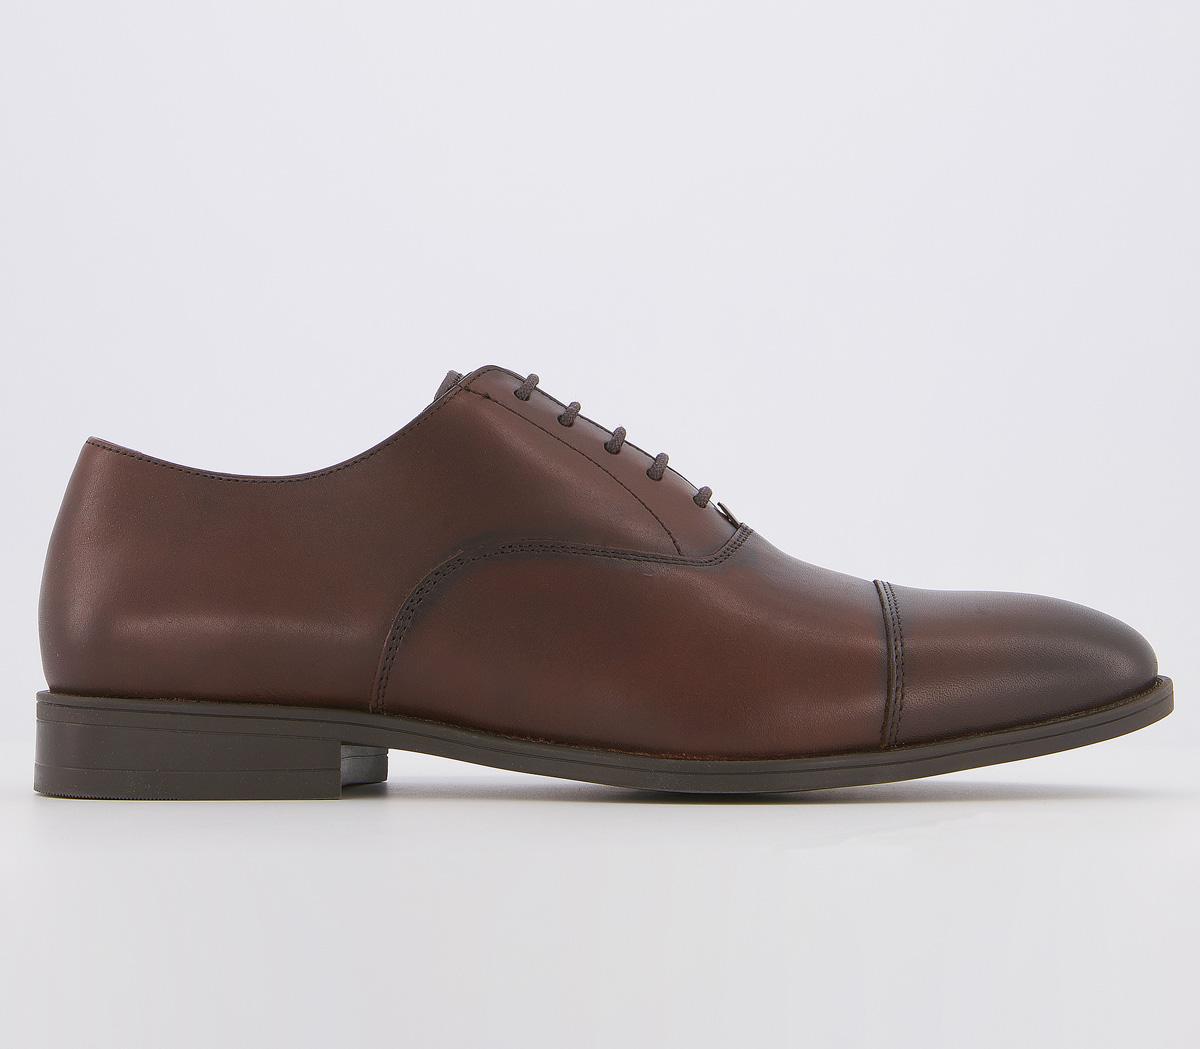 OFFICEMemo Oxford Toe Cap ShoesBrown Leather